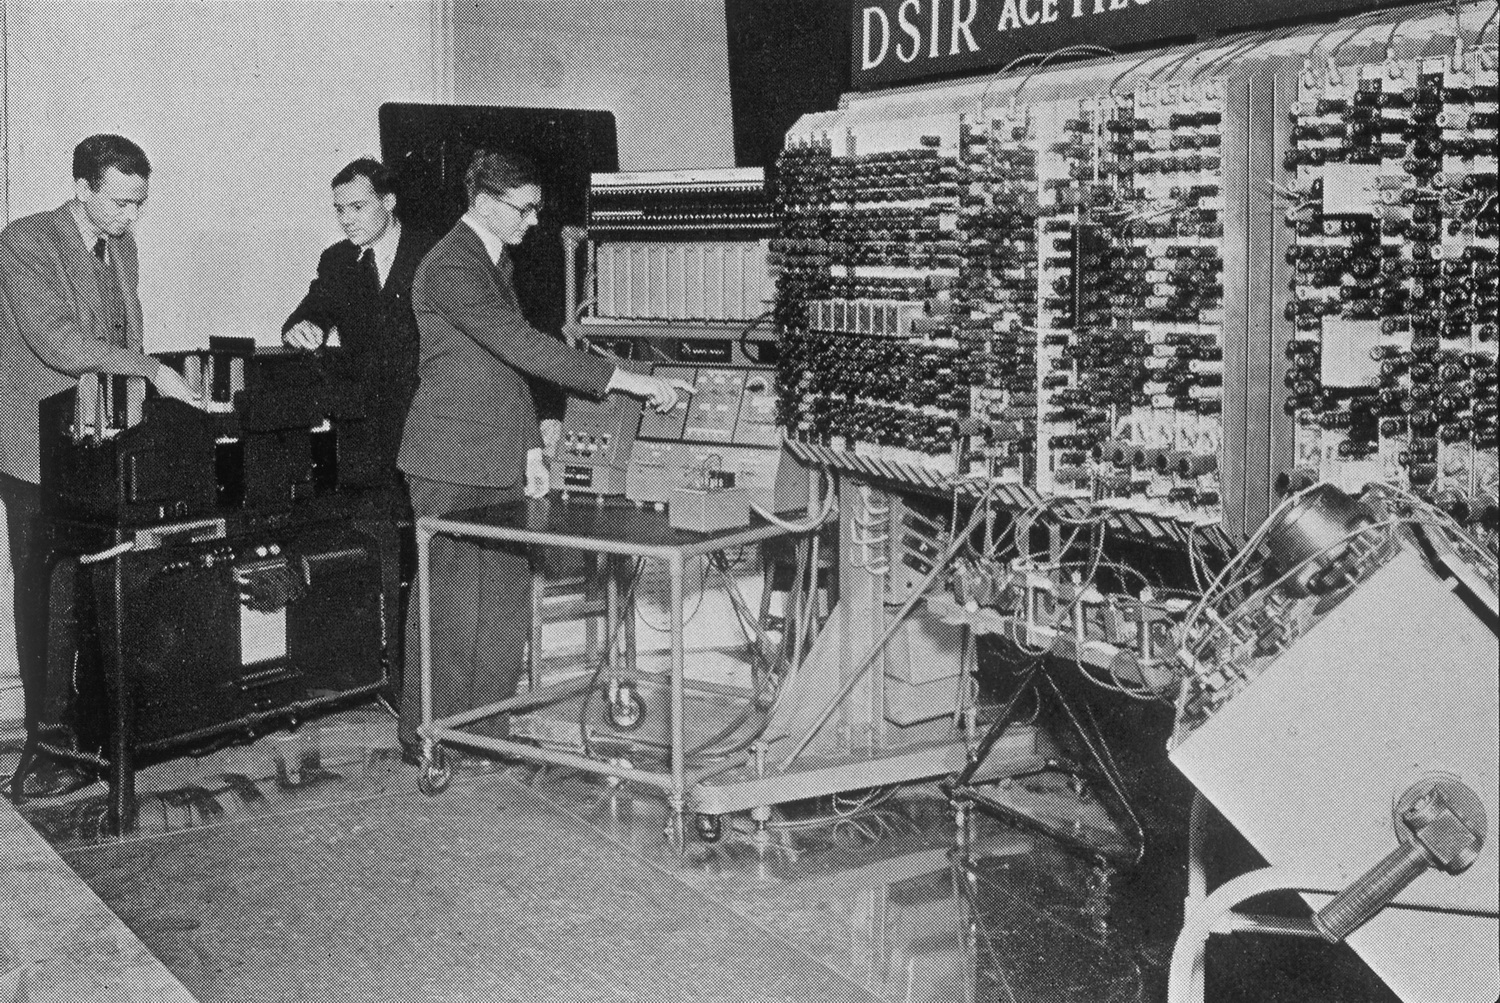 The first public demonstration of the Pilot ACE in 1950. Left to right: Hollerith card punch/reader, operating console, tube rack with short memory tanks.